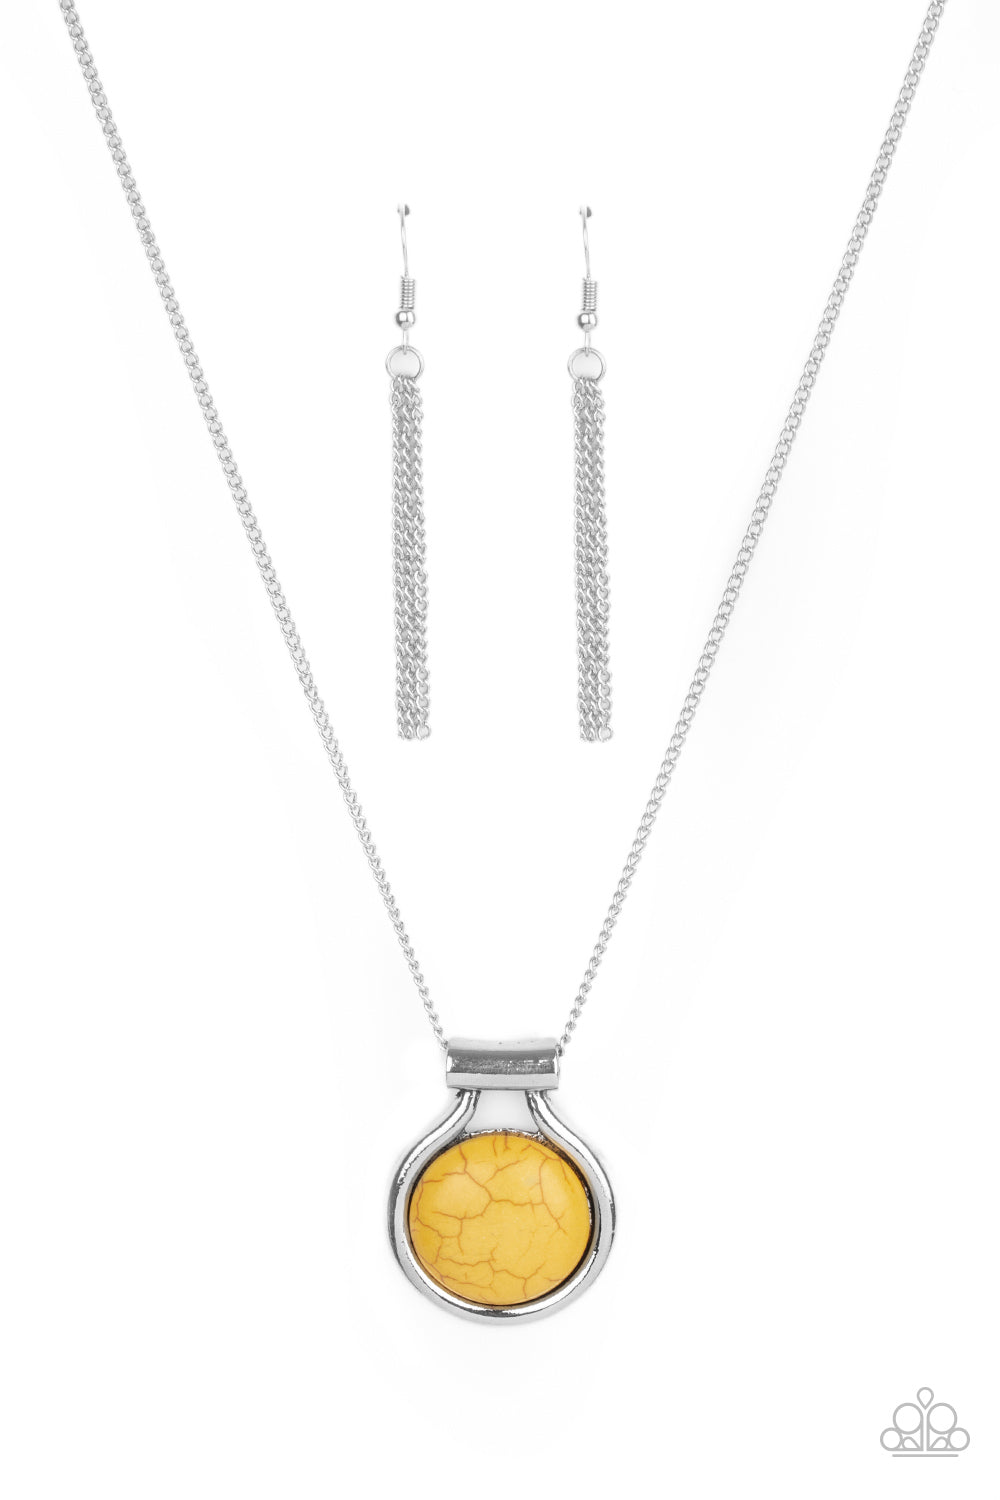 Patagonian Paradise - Yellow necklace A014